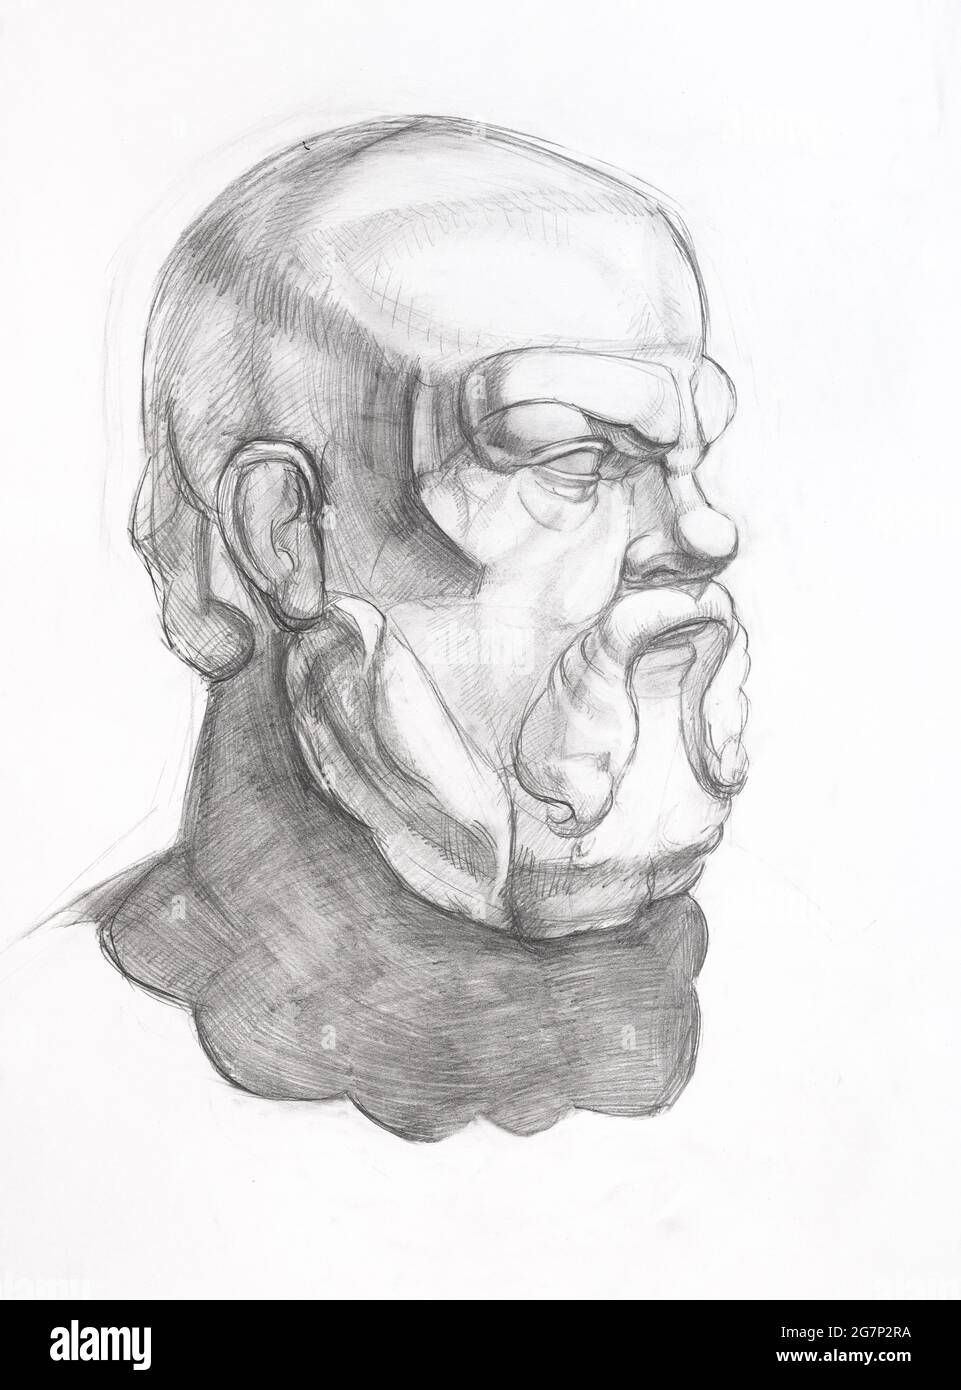 academic drawing - sketch of sculpture of Socrates head hand-drawn by graphite pencil on white paper Stock Photo